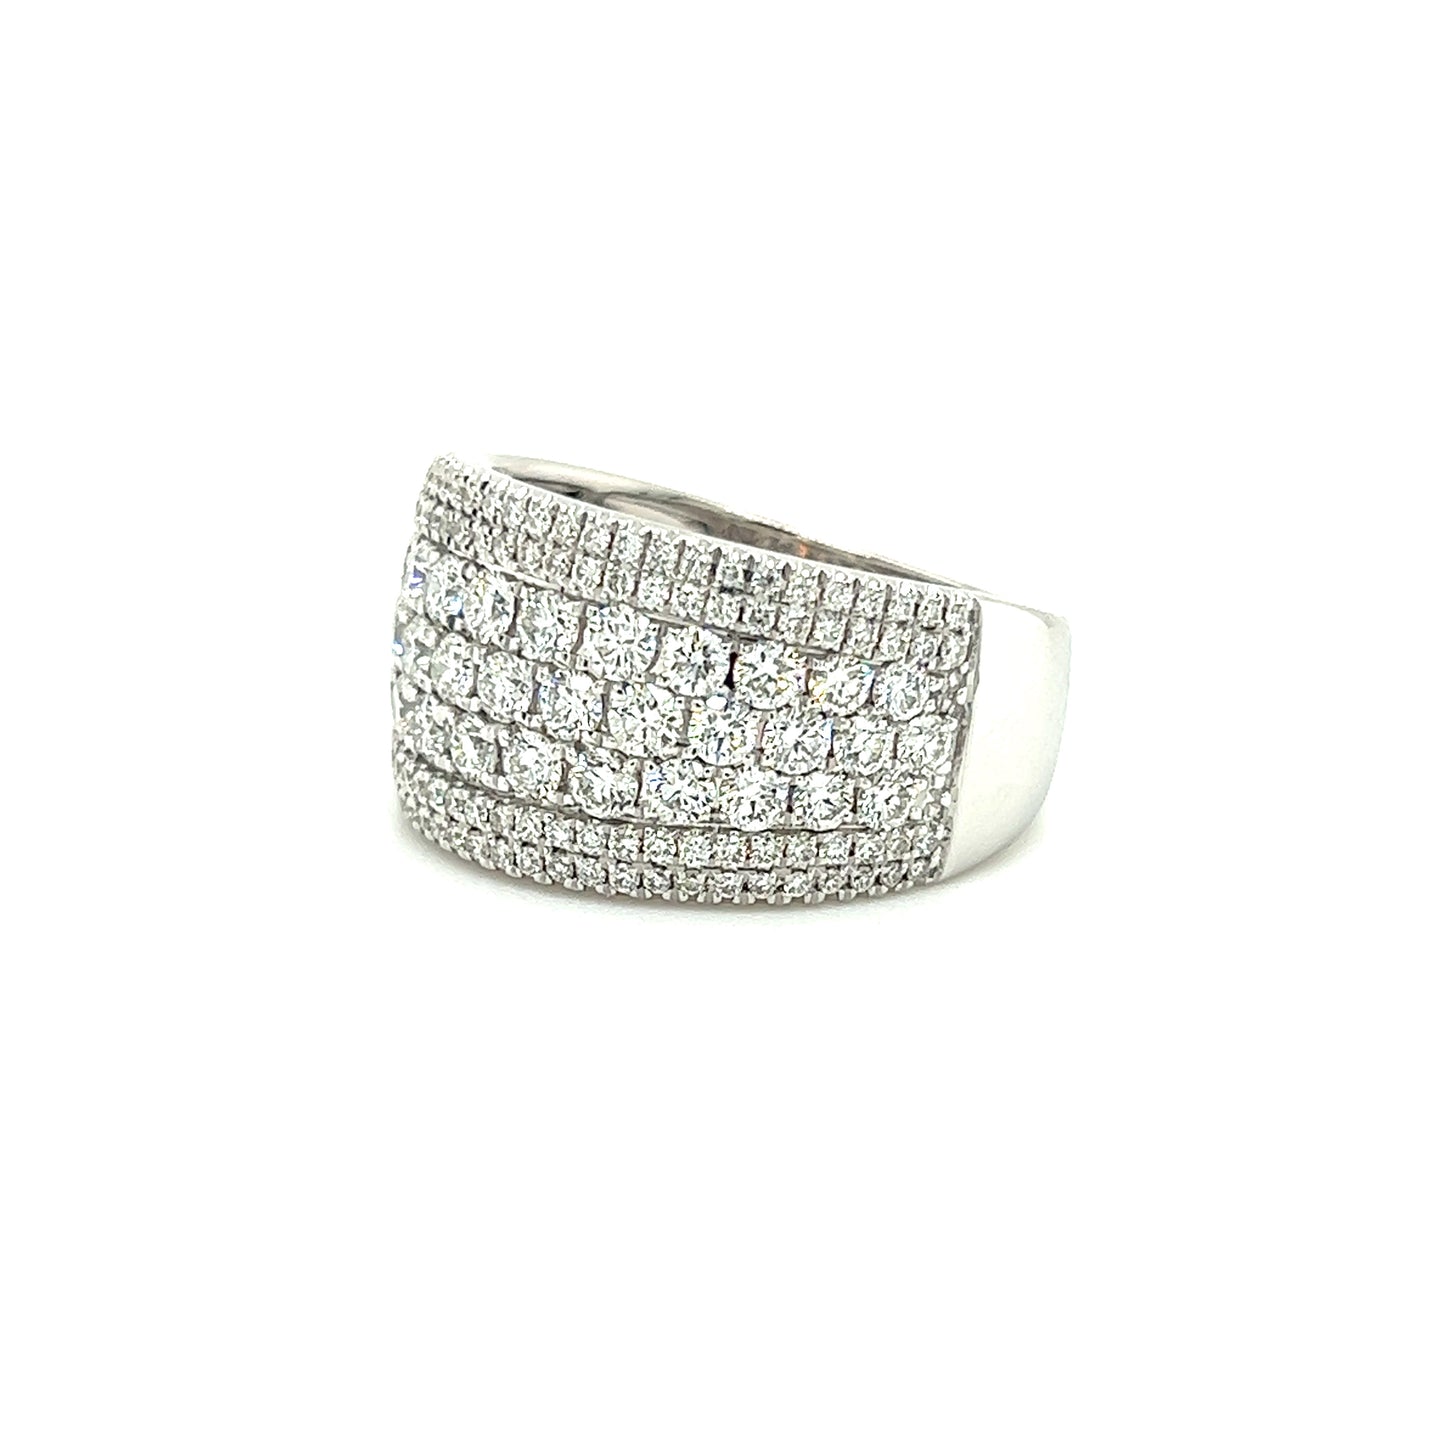 Multi-Row Diamond Ring with 1.9ctw of Diamonds in 14K White Gold Right Side View